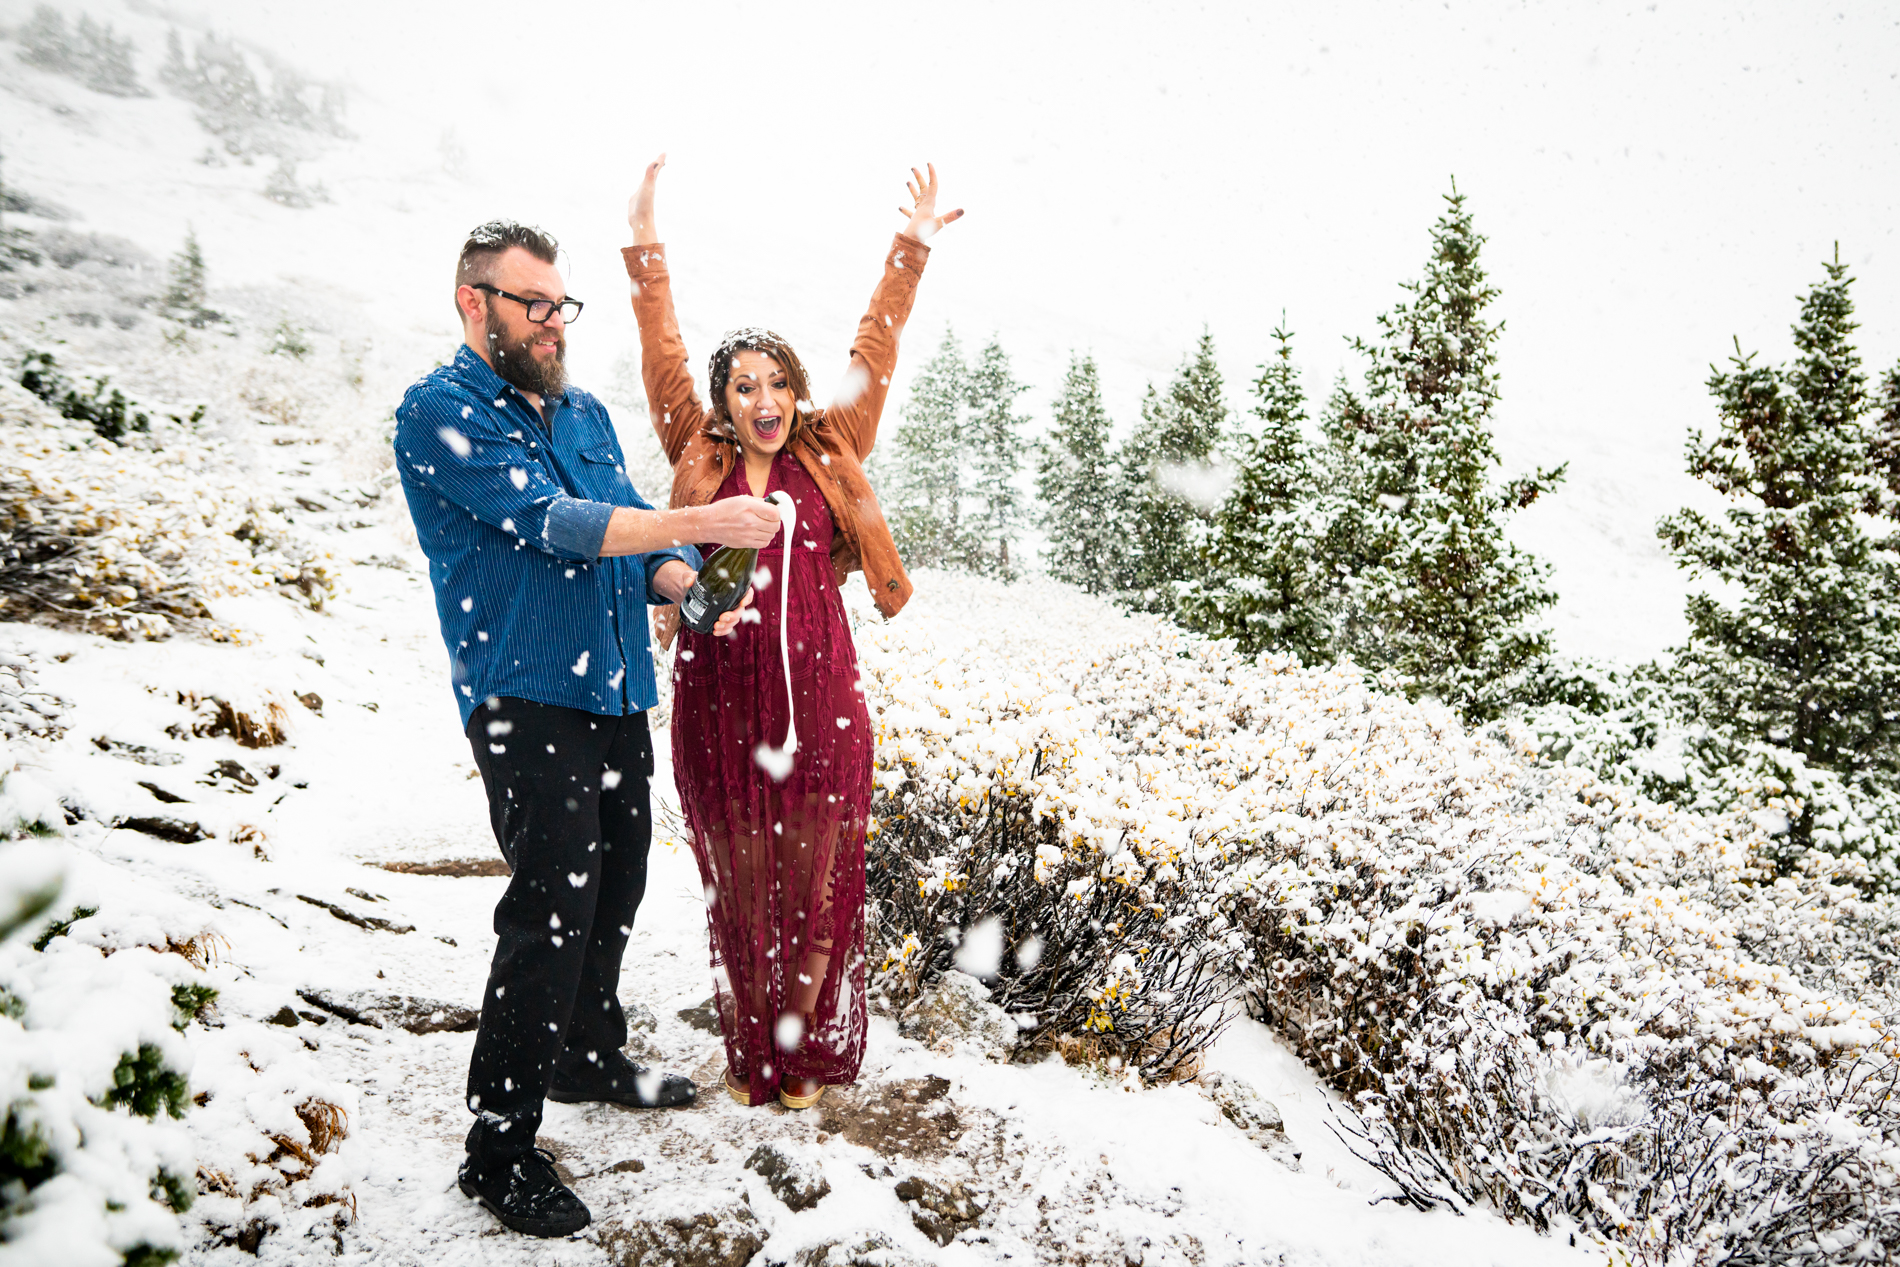 Cottonwood Pass Engagement Photos in Buena Vista with fall foliage, mountains and a winter blizzard